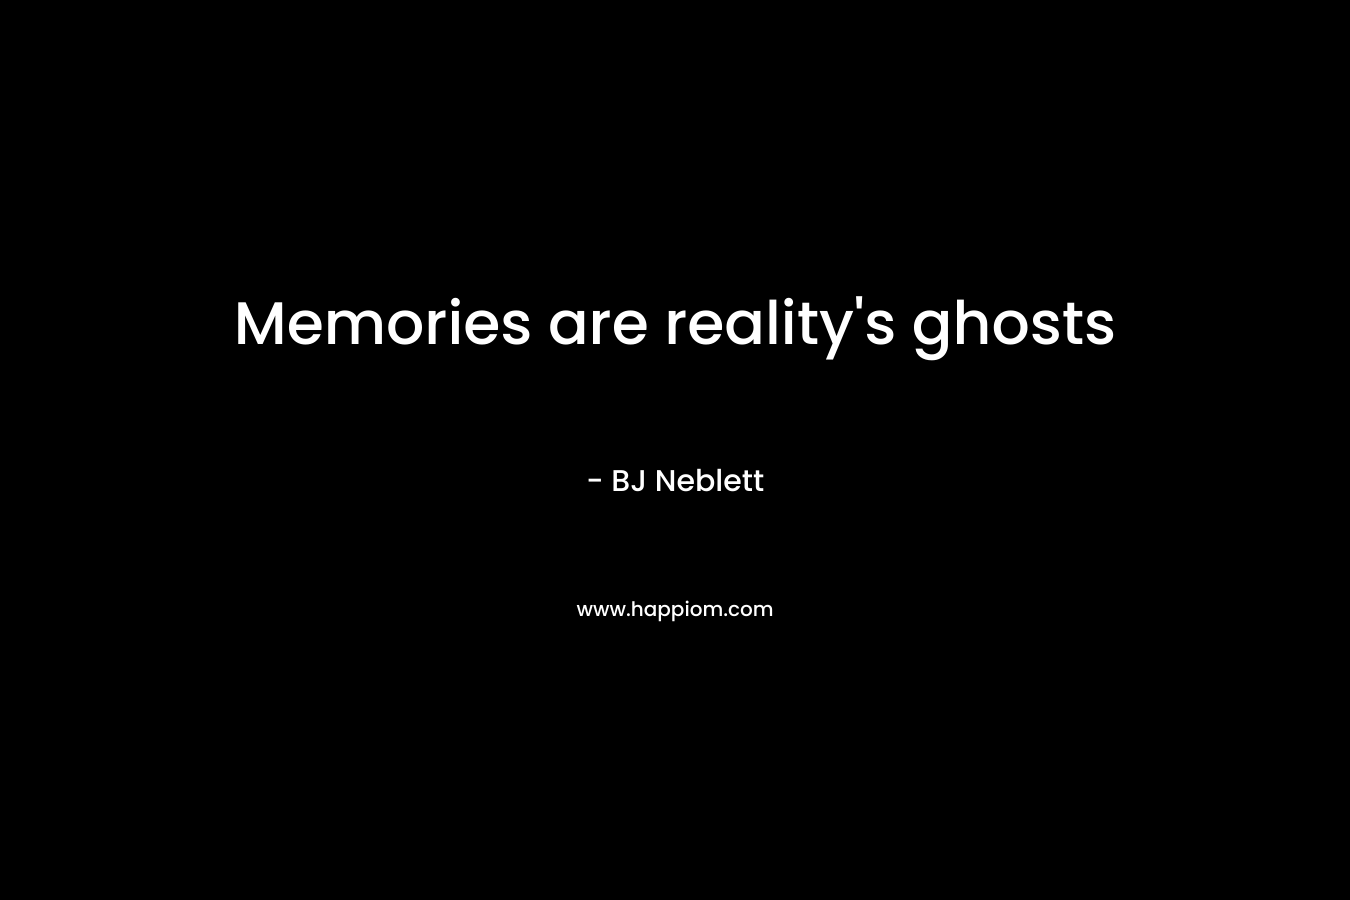 Memories are reality's ghosts